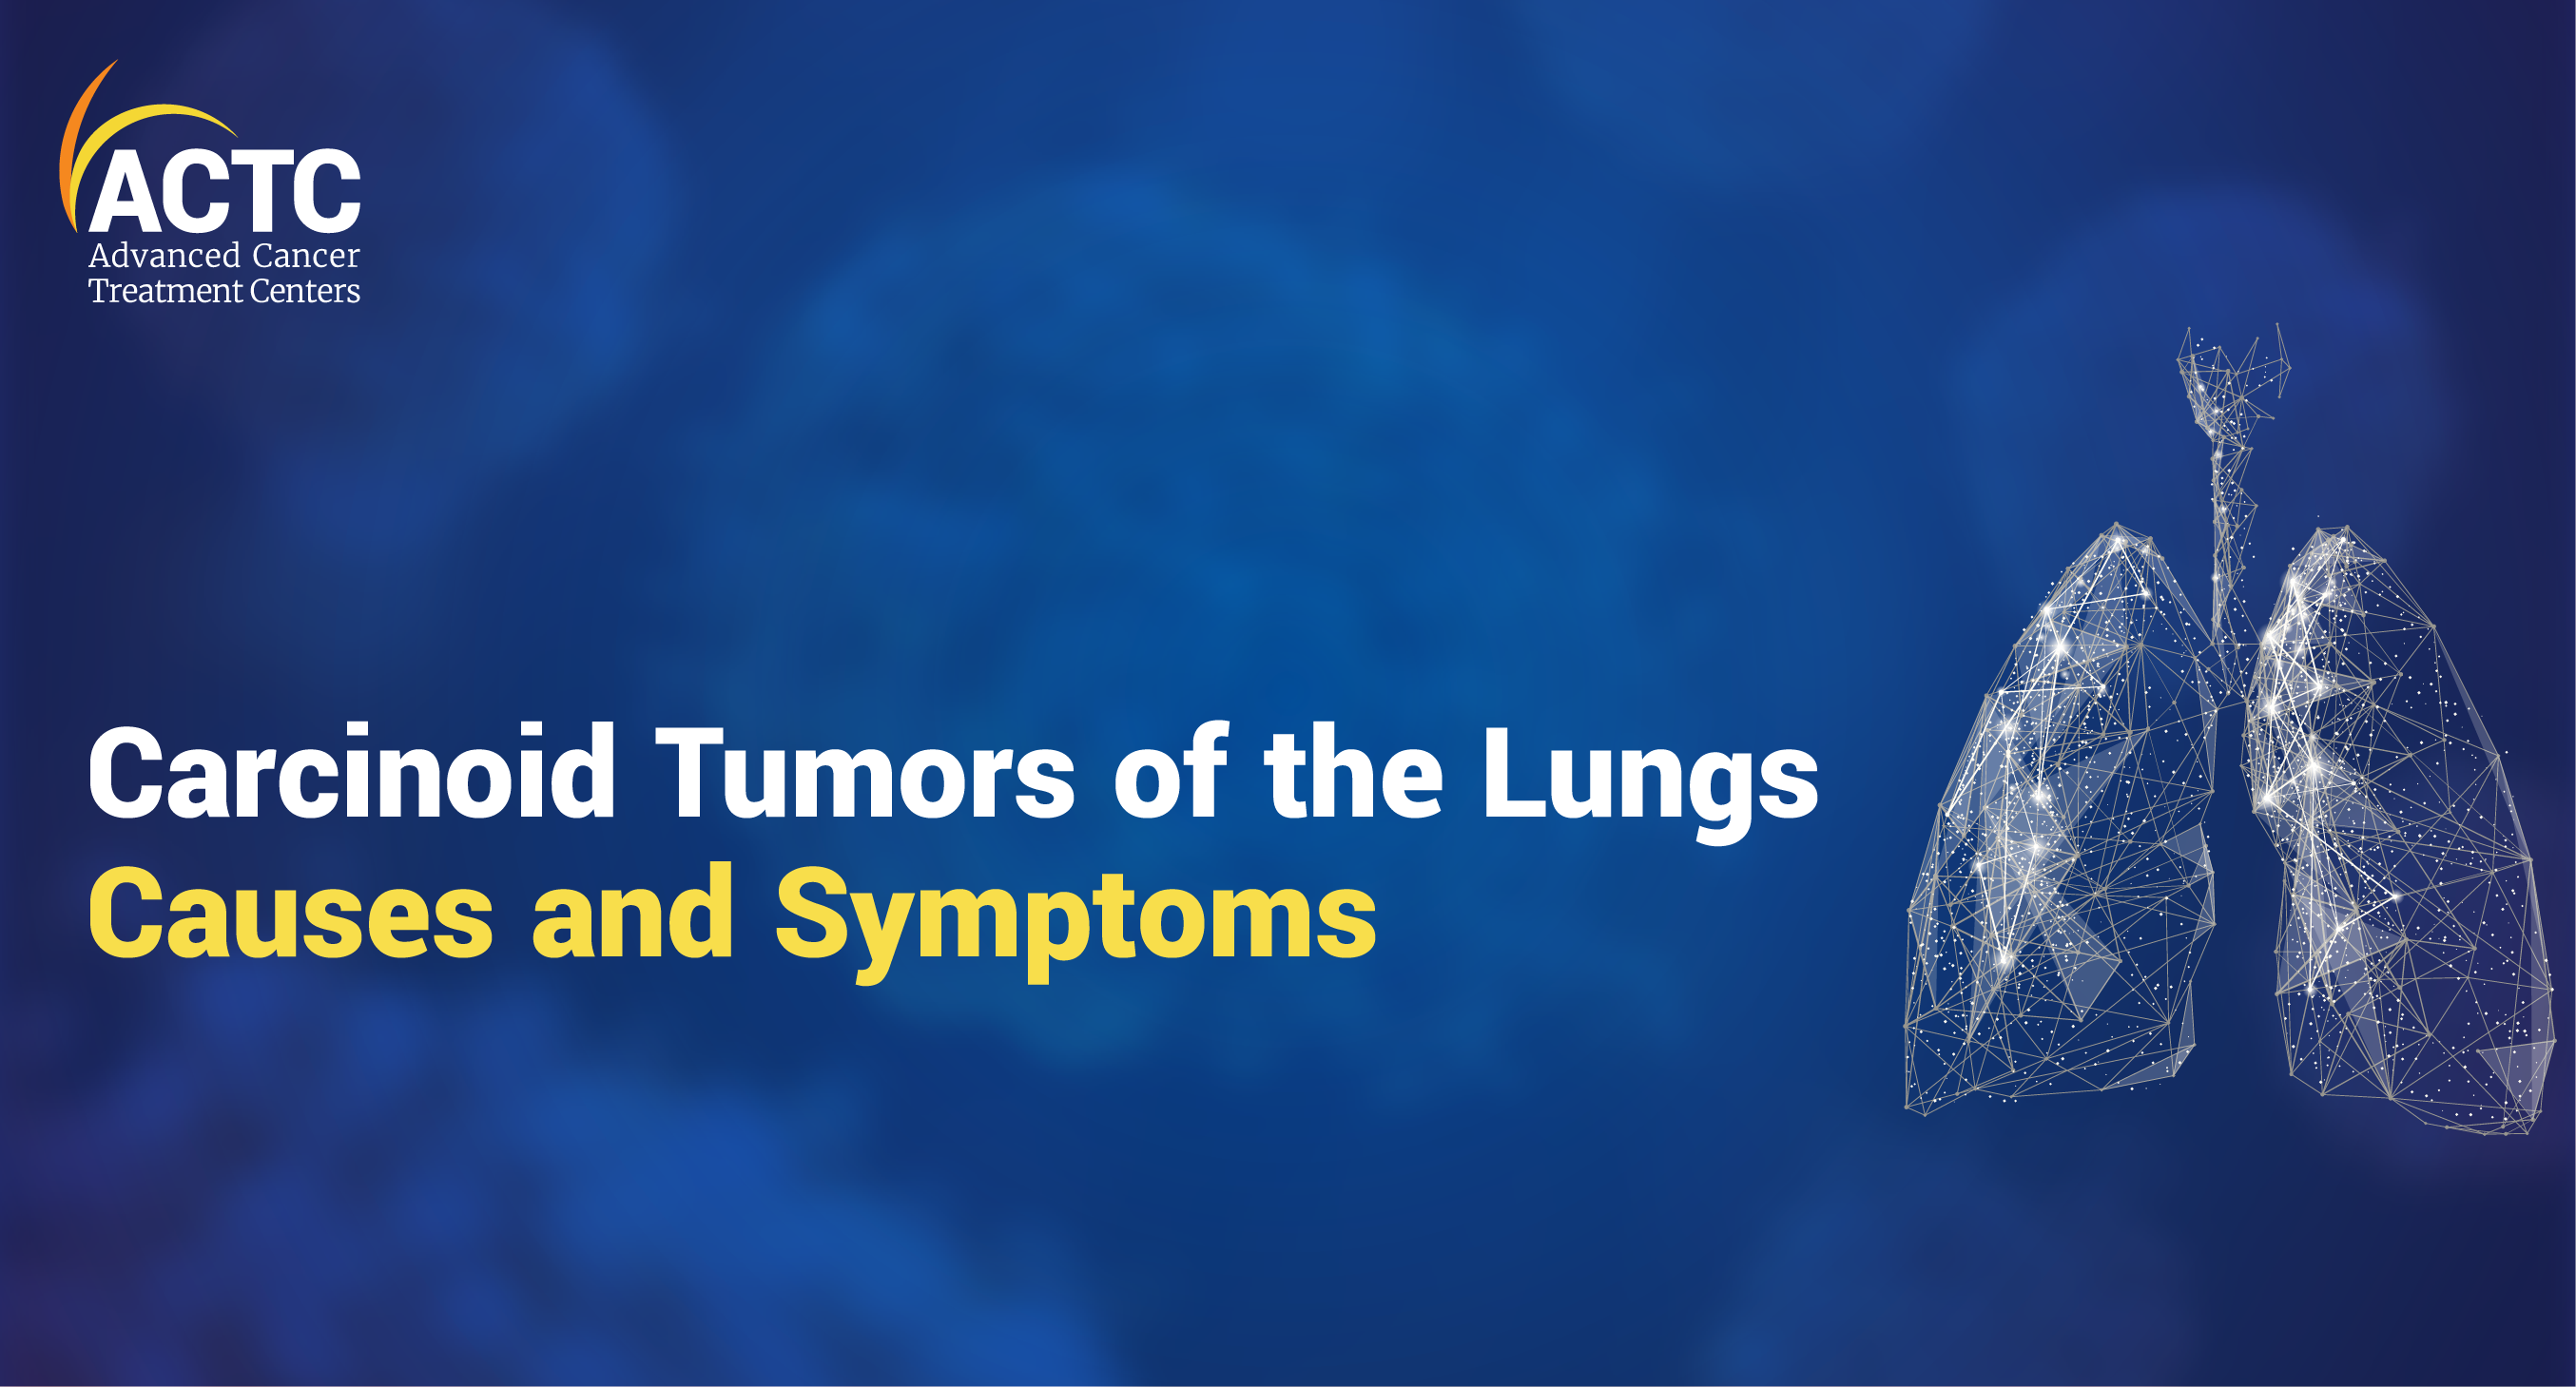 Carcinoid Tumors of the Lungs: Causes and Symptoms